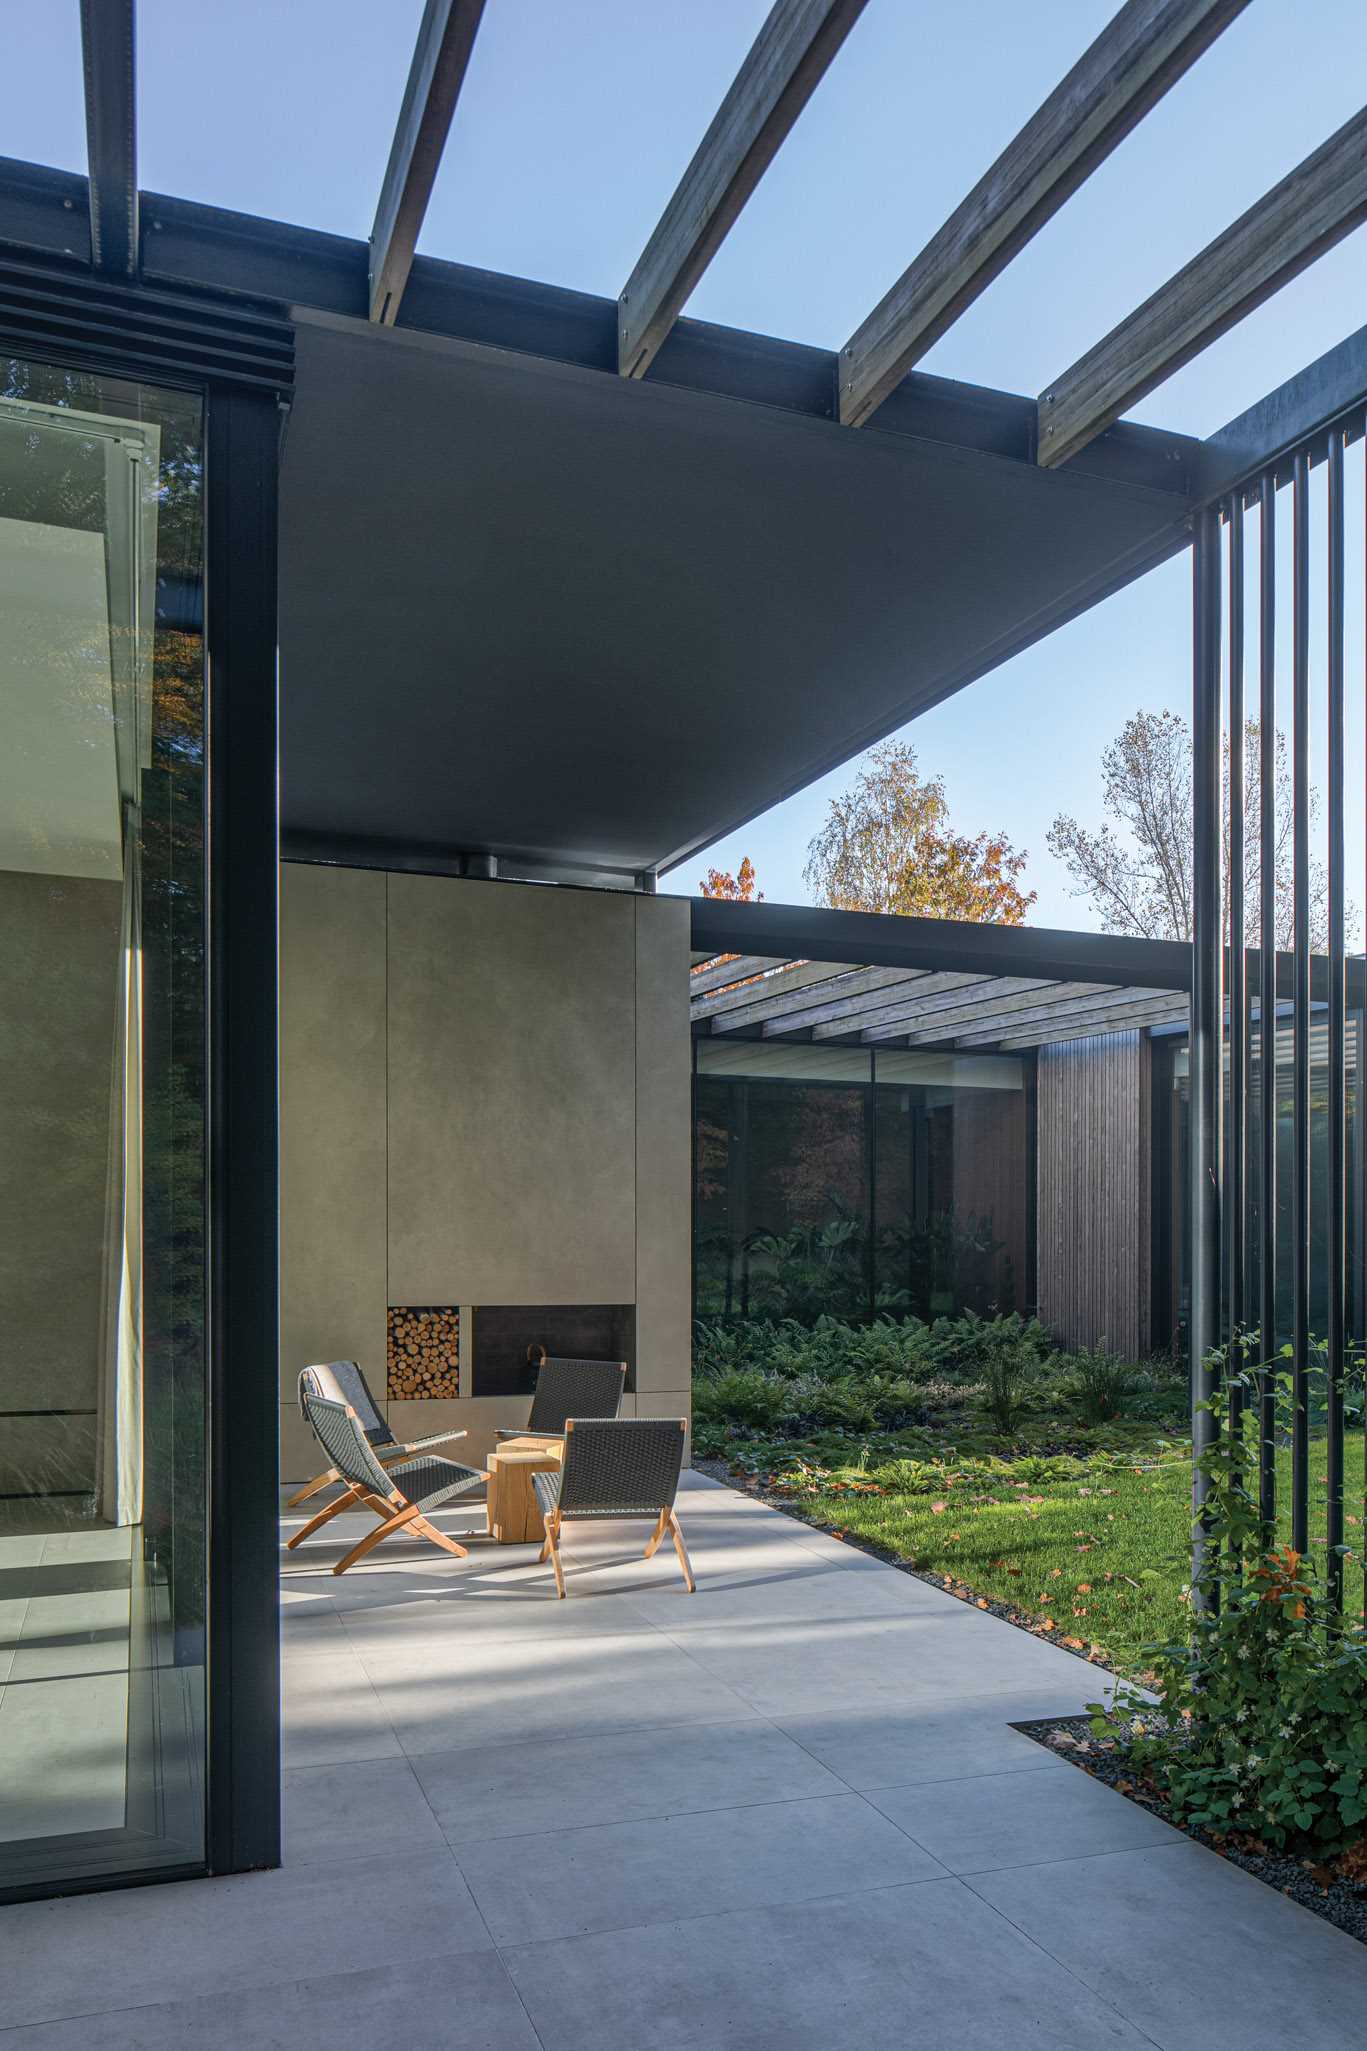 Large-format quartz features on the floor inside and out this modern home, as seen in a patio with an outdoor fireplace that's located off the living room.